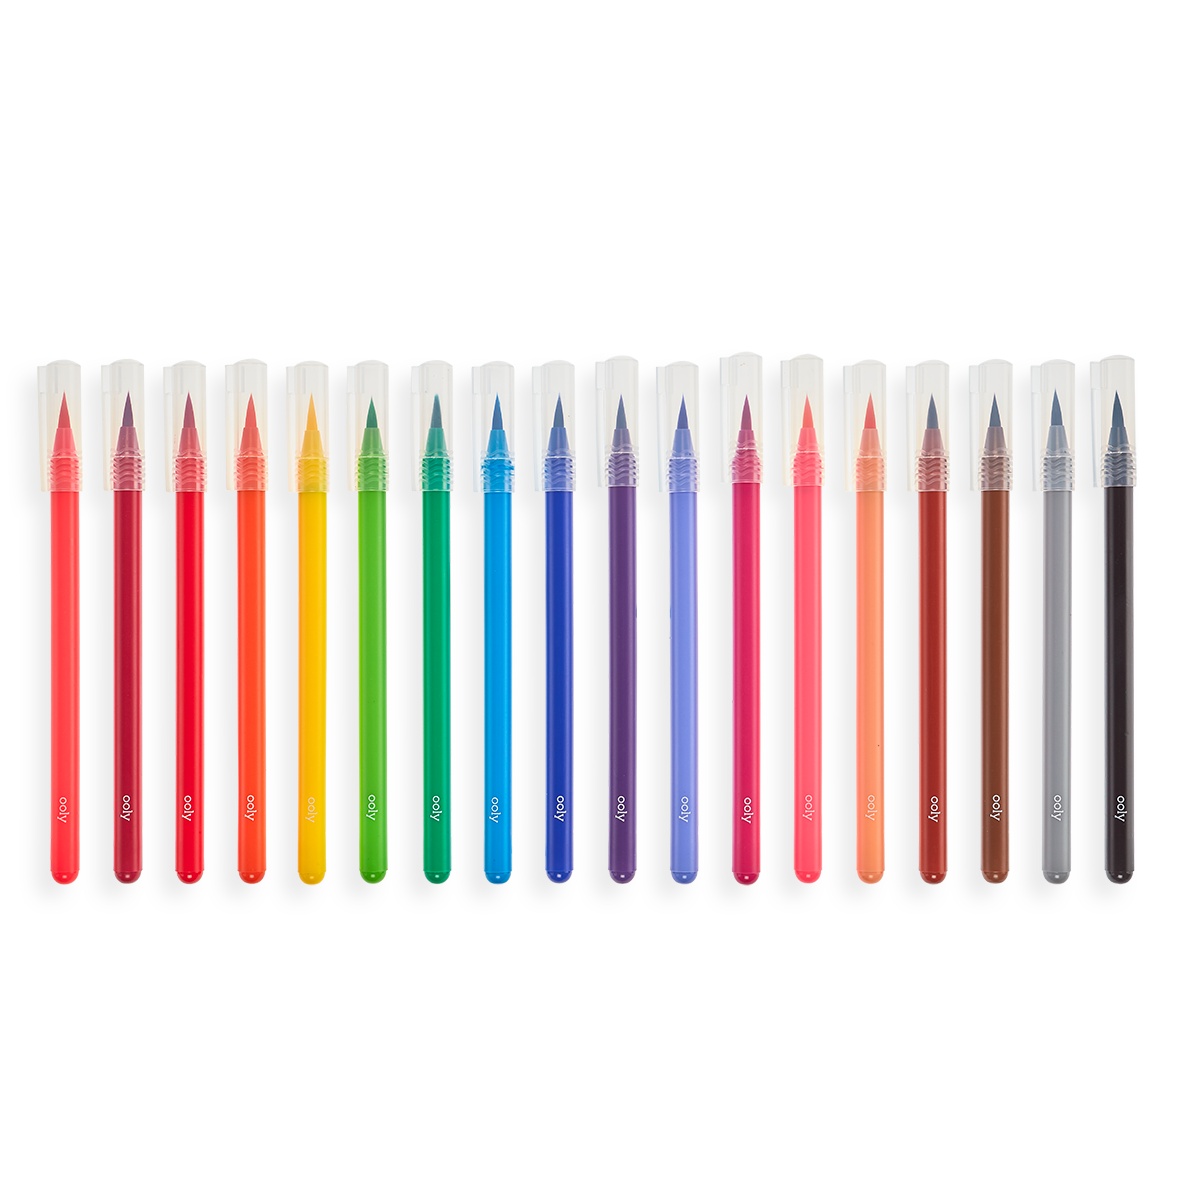 Chroma Blends Watercolor Markers lined up  in a row